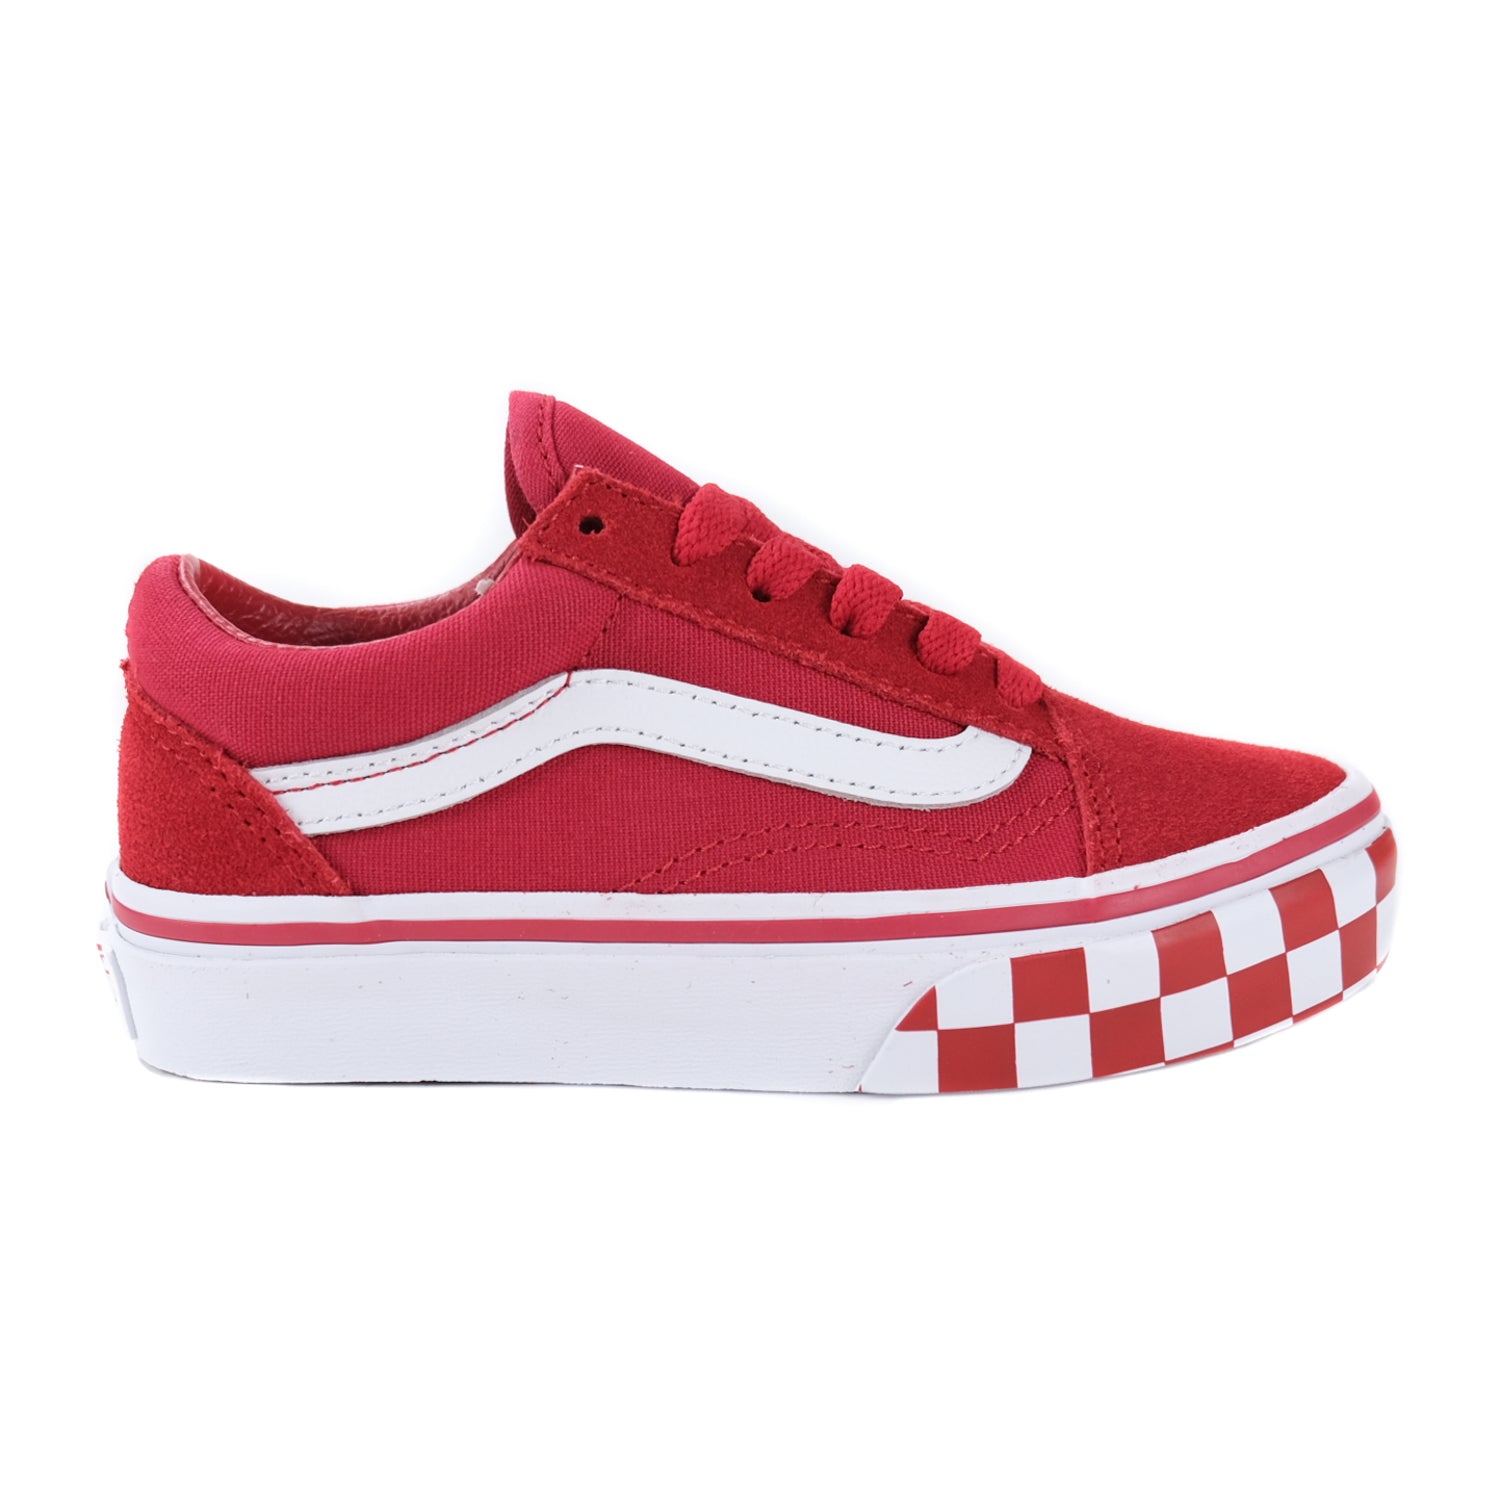 Youth Old Skool - Red Checkered Bumper